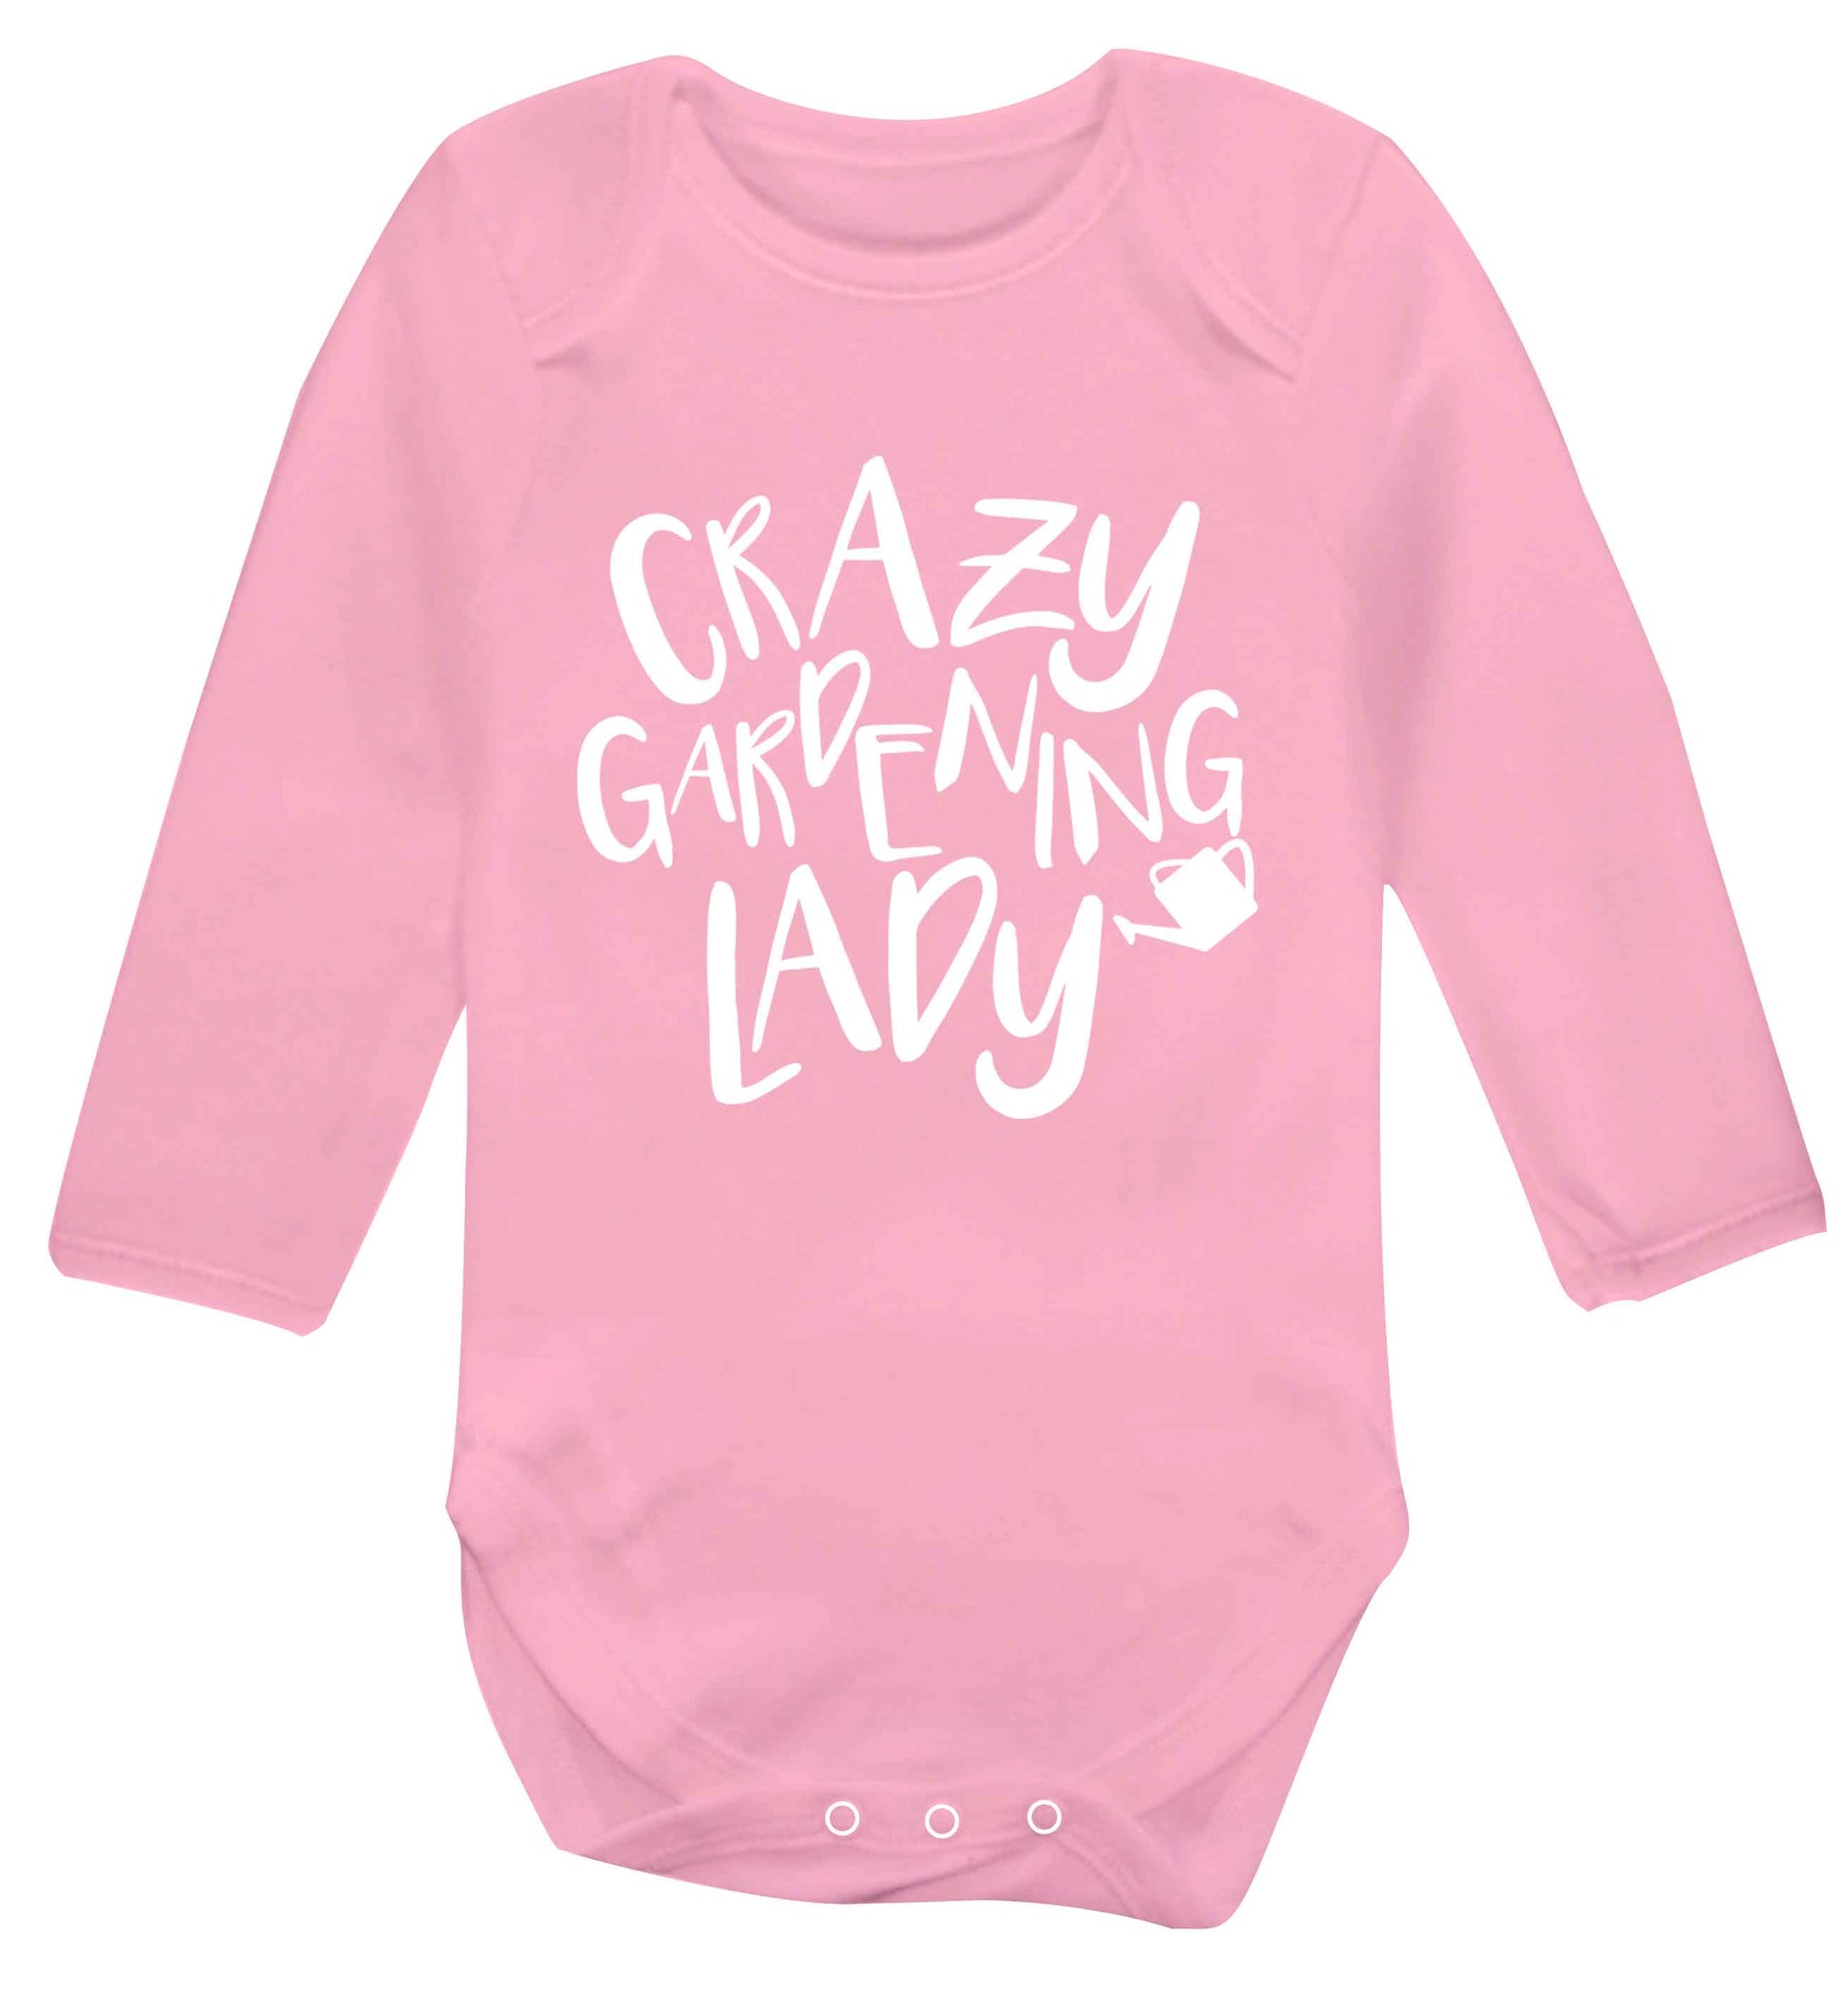 Crazy gardening lady Baby Vest long sleeved pale pink 6-12 months